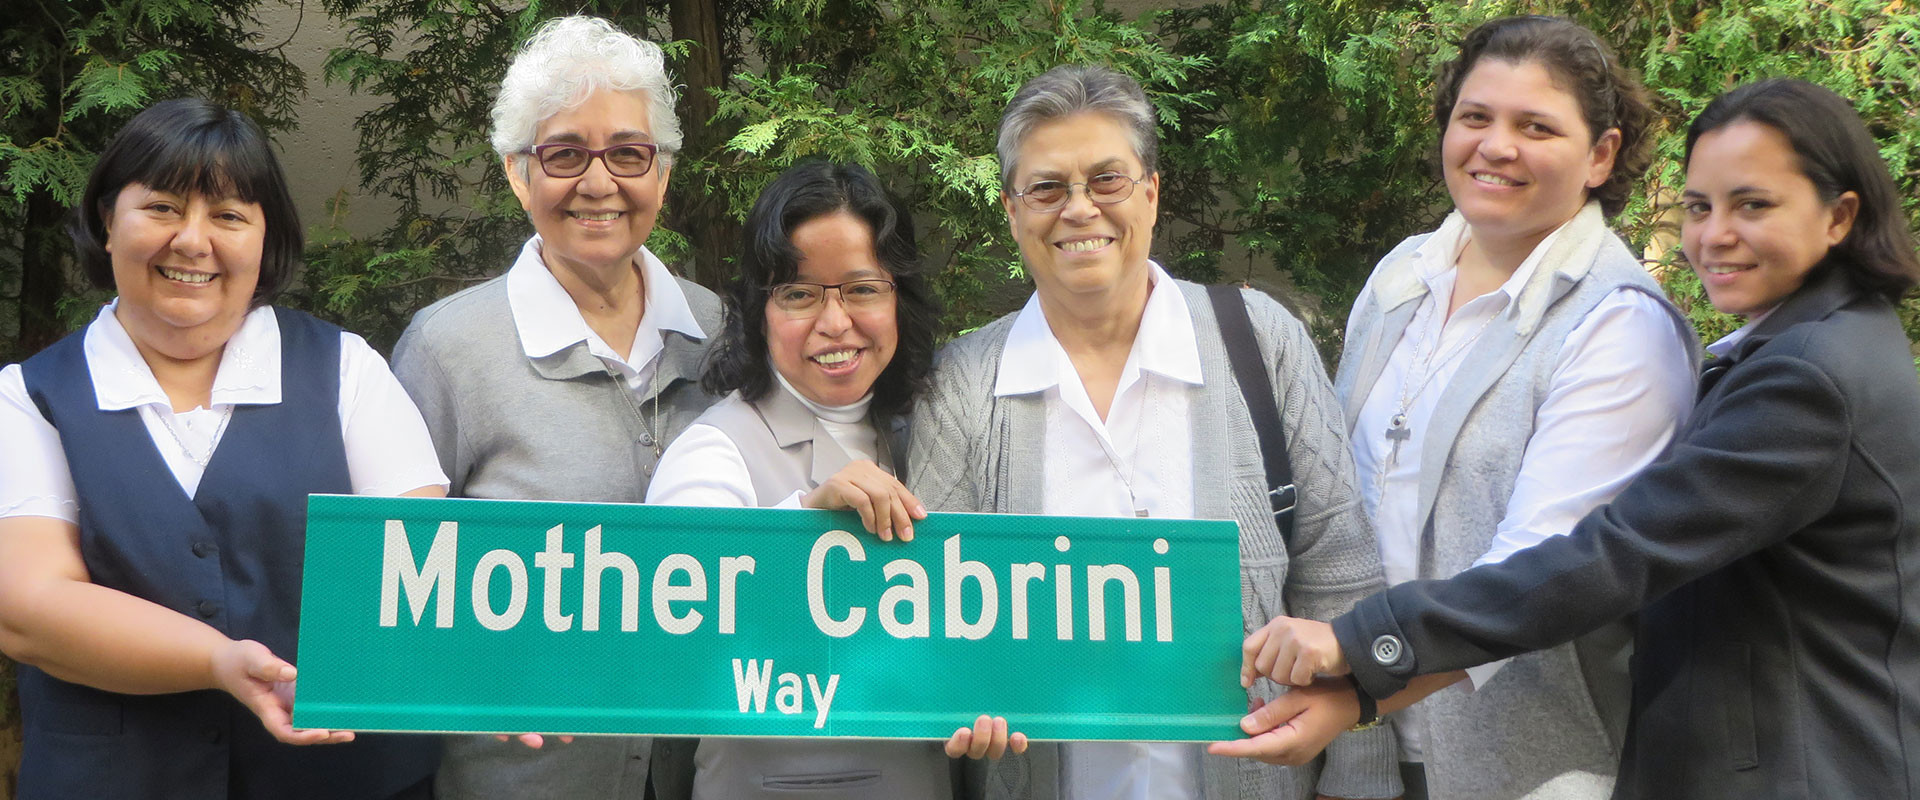 Missionary Sisters with Mother Cabrini Way street sign